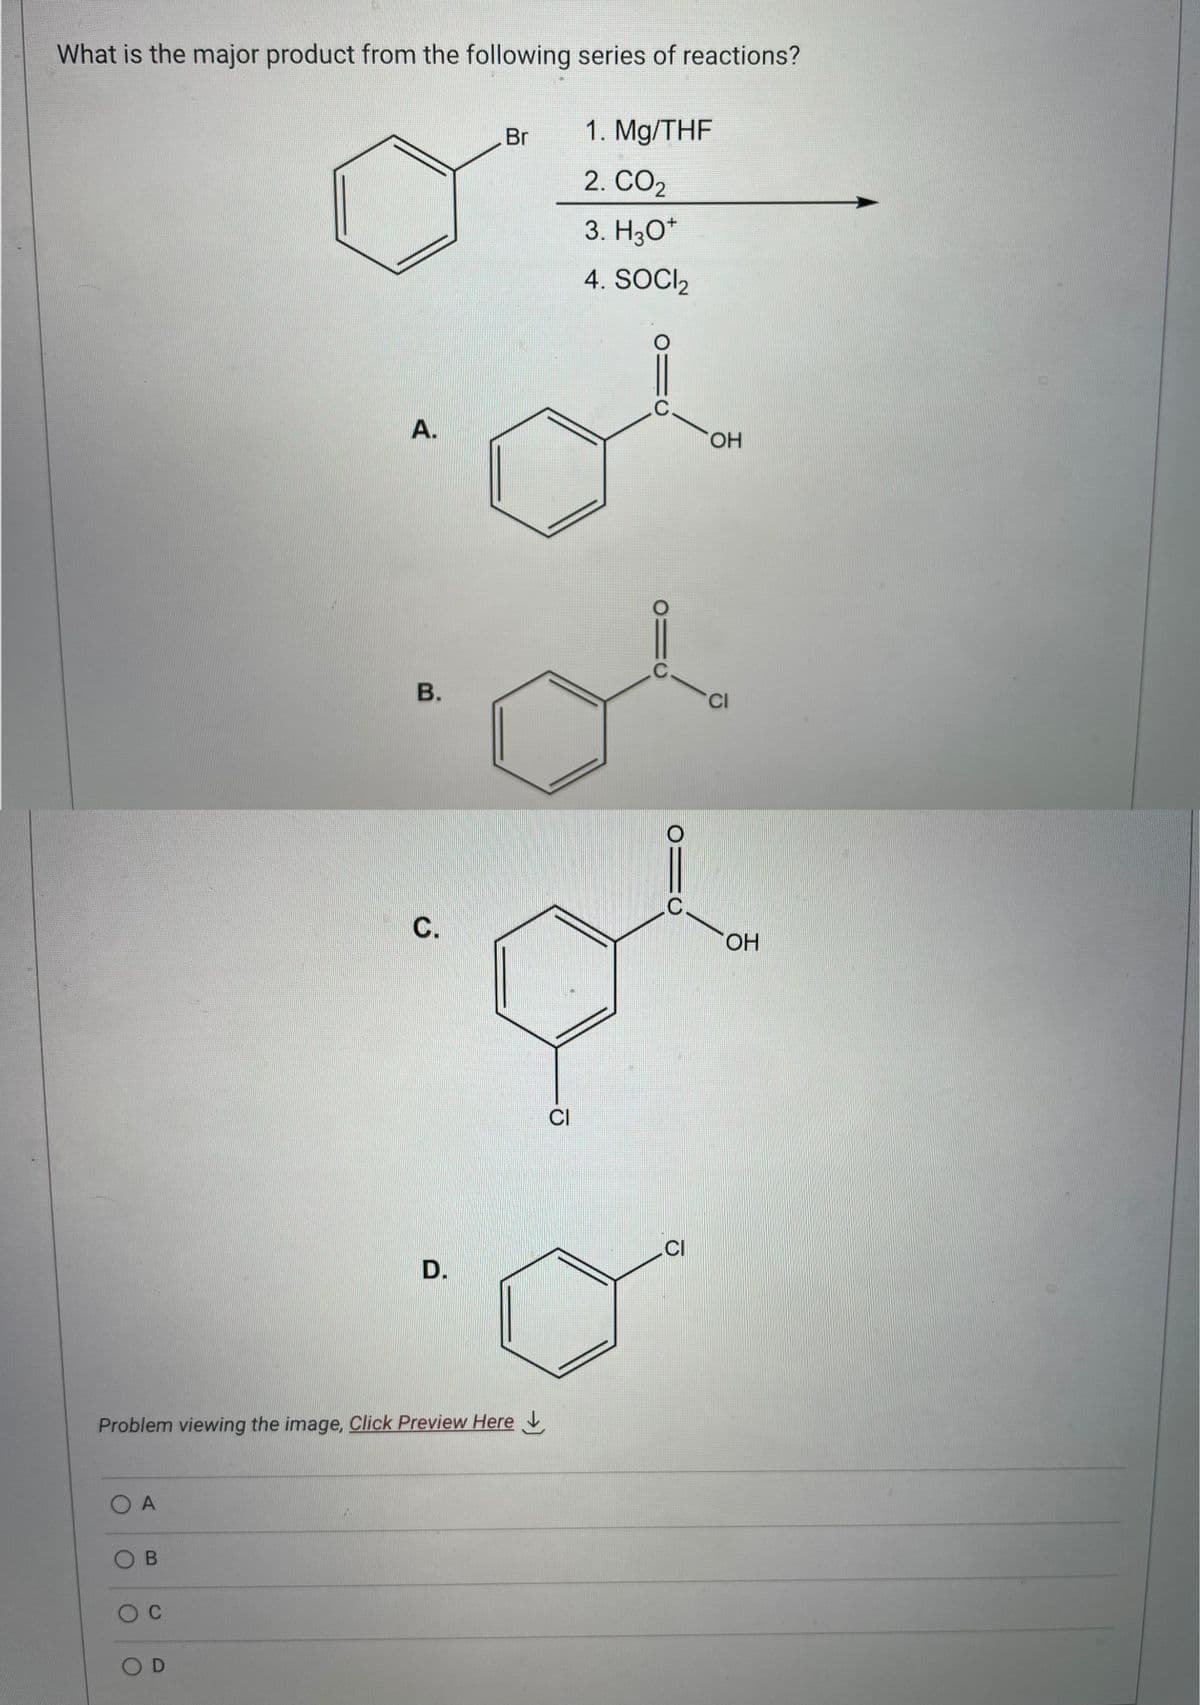 What is the major product from the following series of reactions?
O A
OB
O C
A.
O D
B.
Problem viewing the image, Click Preview Here
C.
D.
Br
CI
1. Mg/THF
2. CO₂
3. H3O+
4. SOCI₂
910
C.
CI
OH
CI
OH